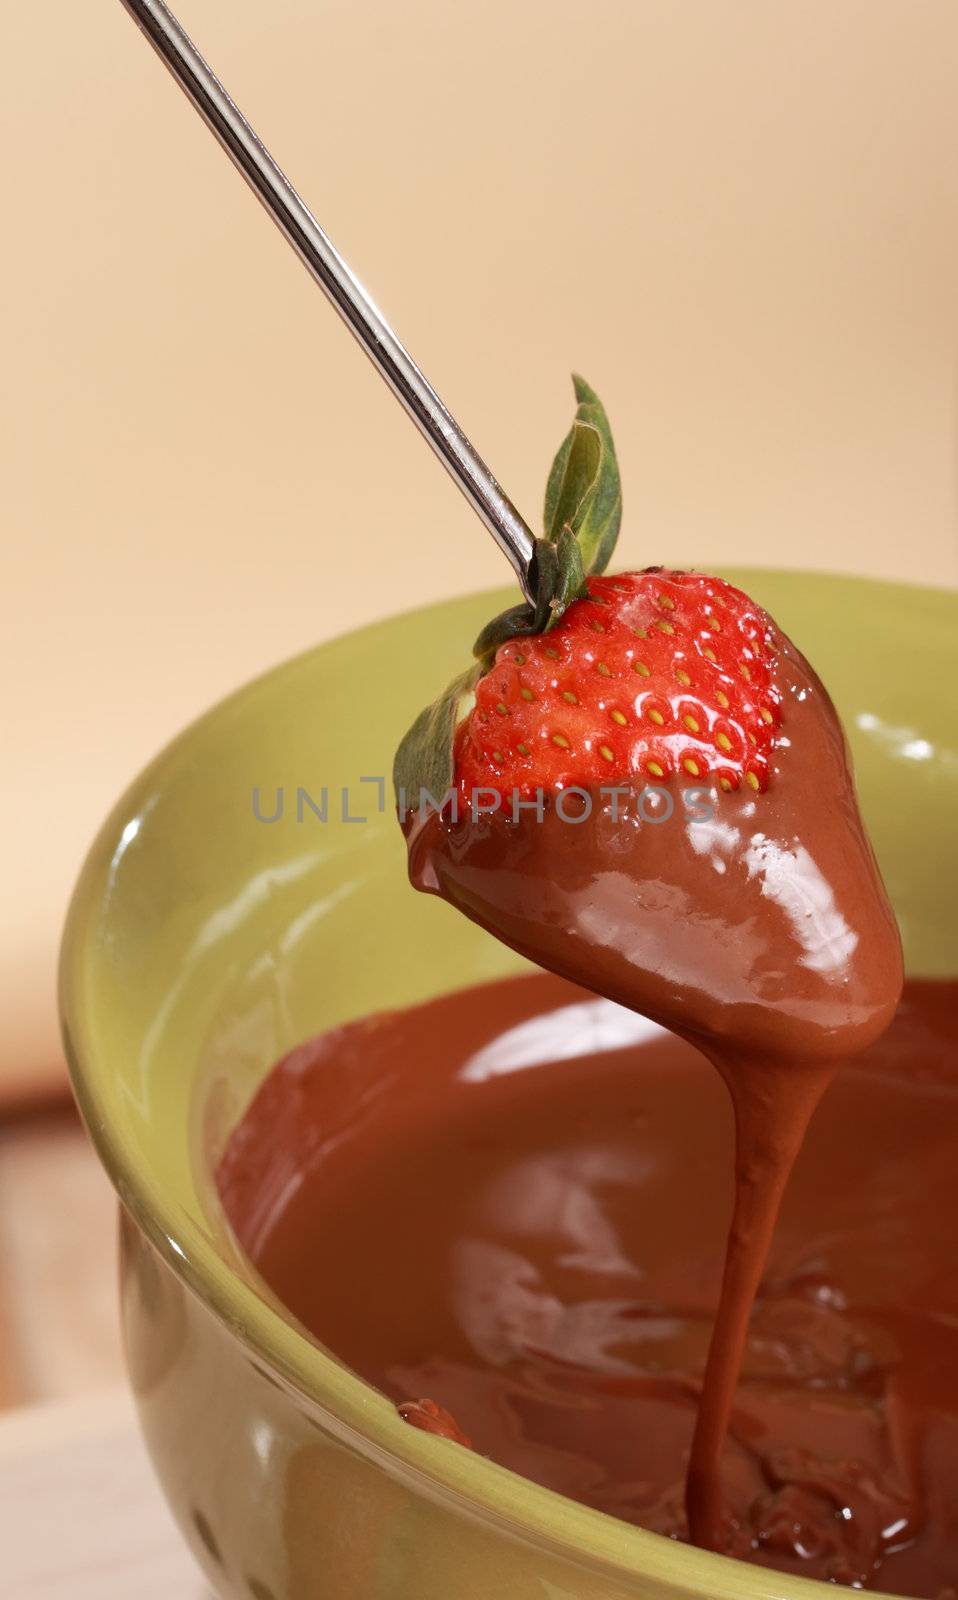 chocolate fondue kit and strawberry by lanalanglois